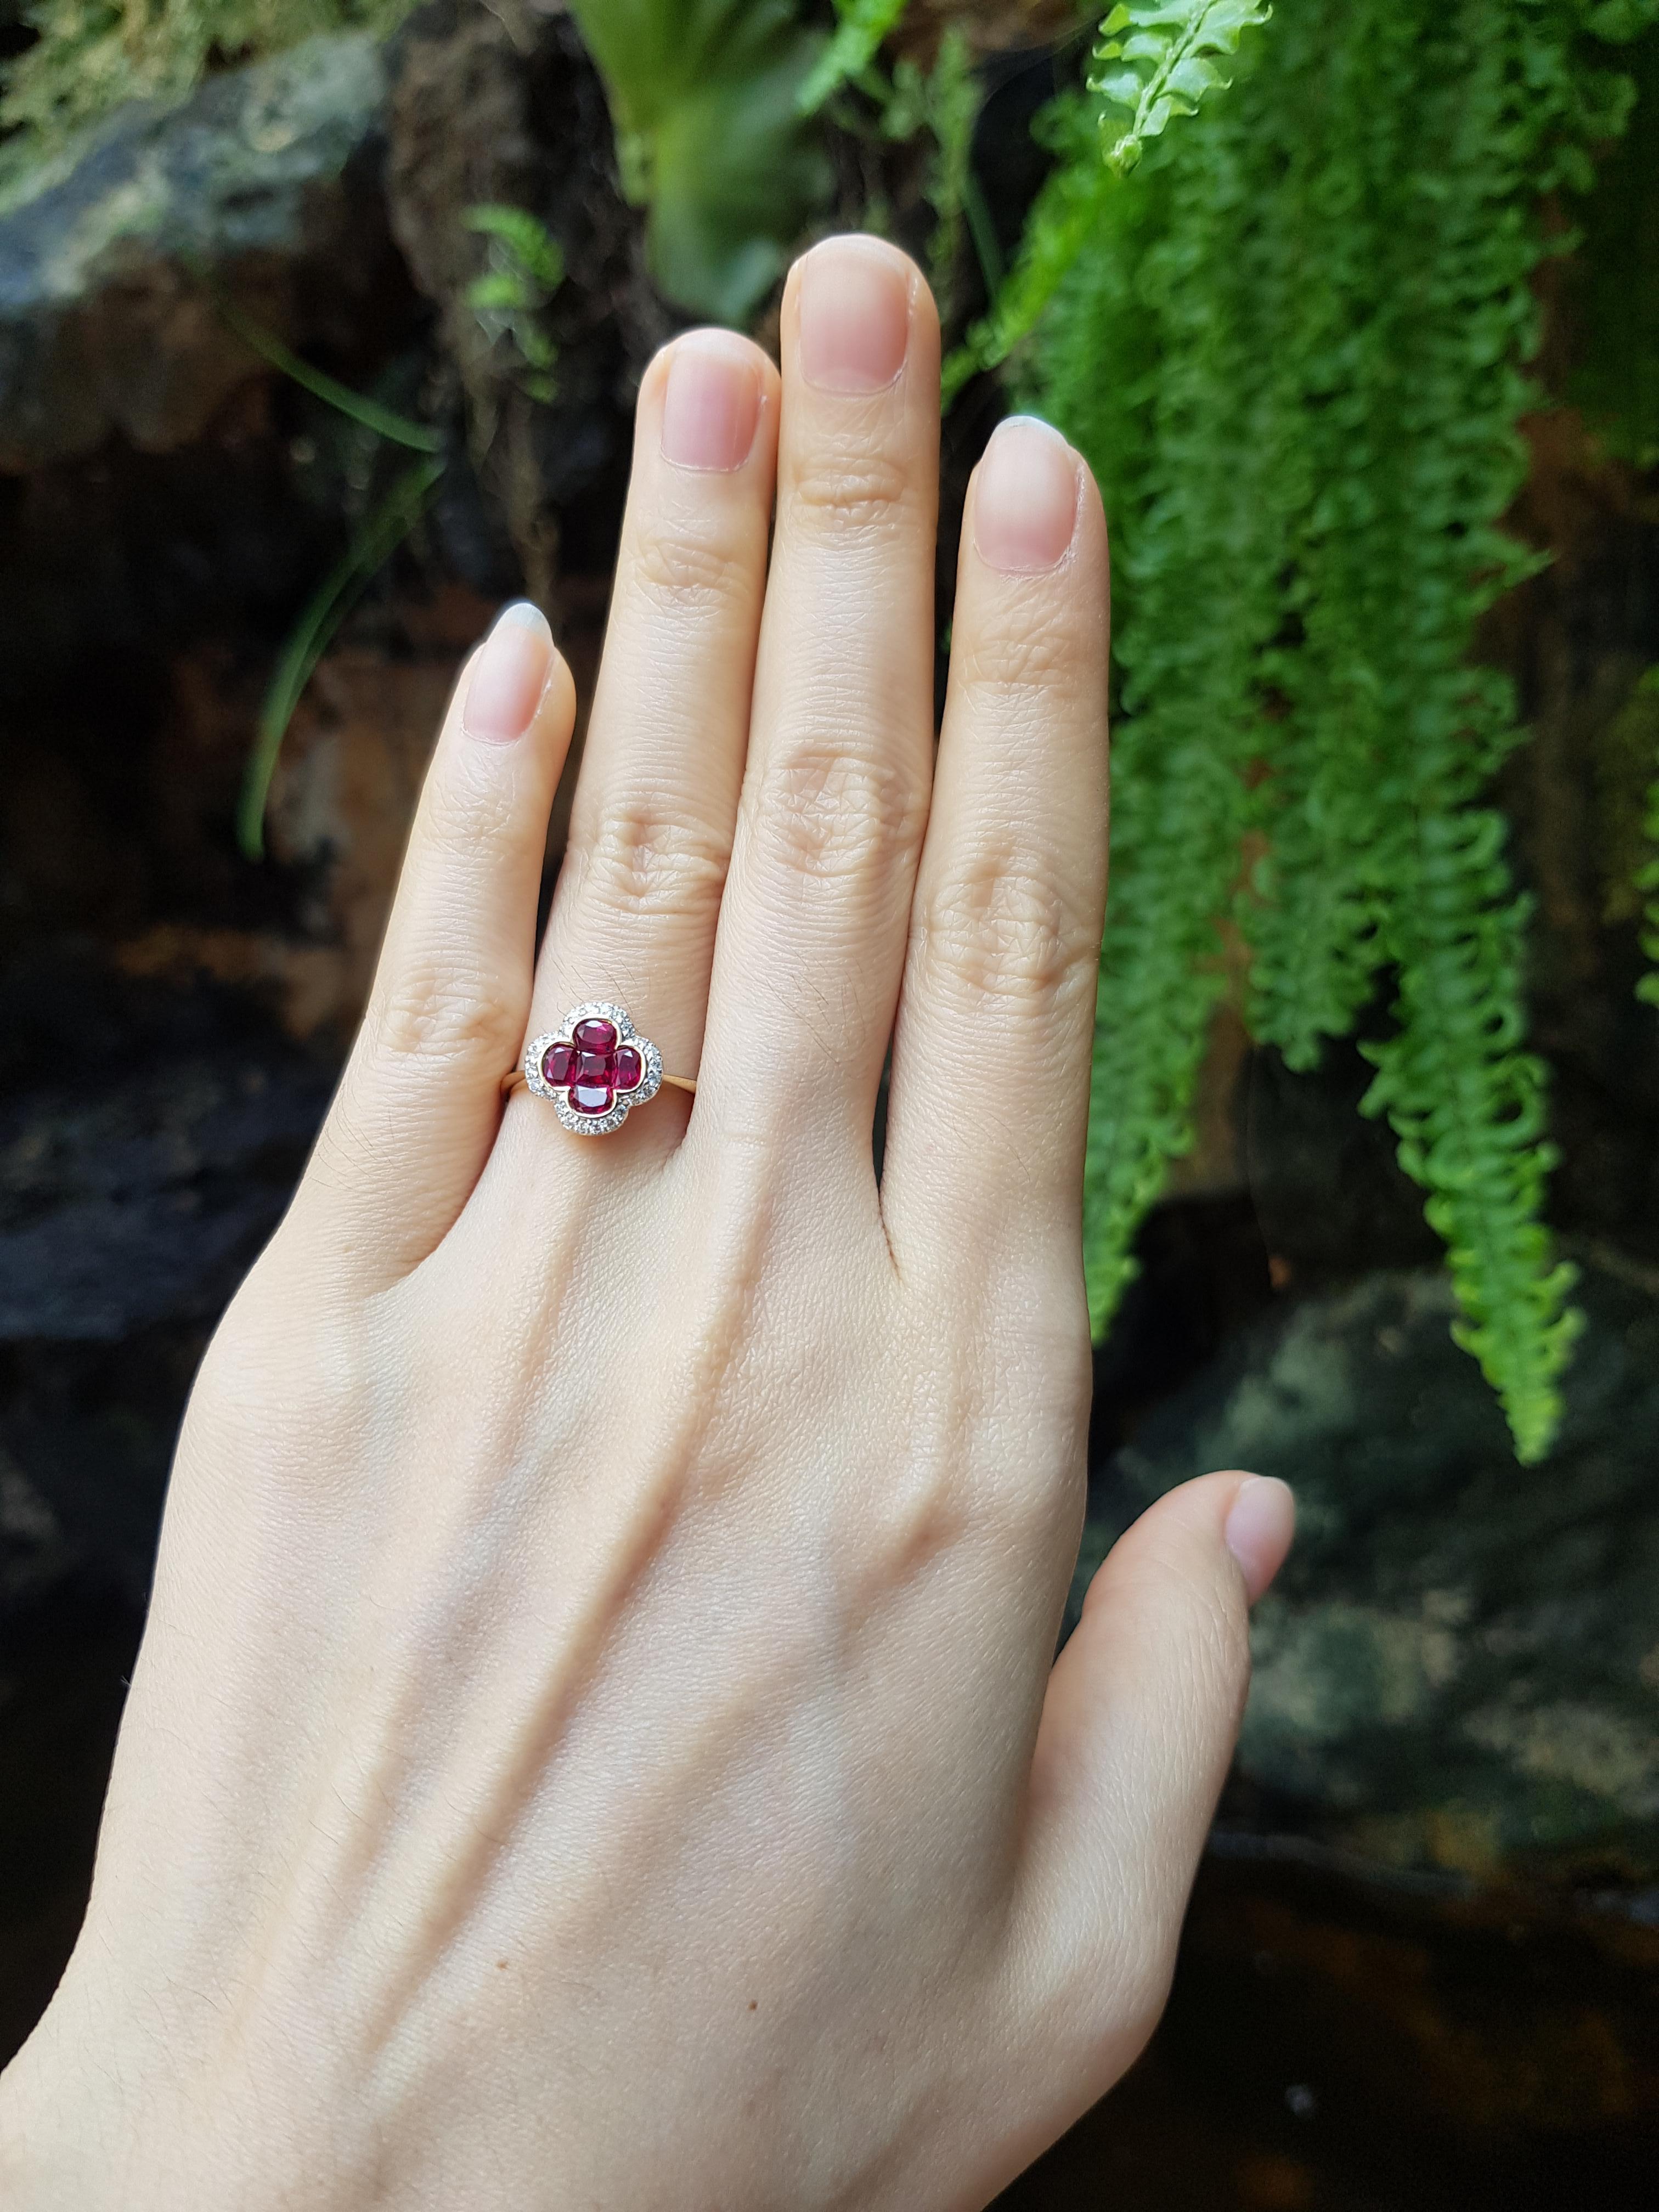 Ruby 1.16 carats with Diamond 0.15 carat Ring set in 18 Karat Gold Settings

Width: 1.0 cm
Length: 1.0 cm 
Ring Size: 53

